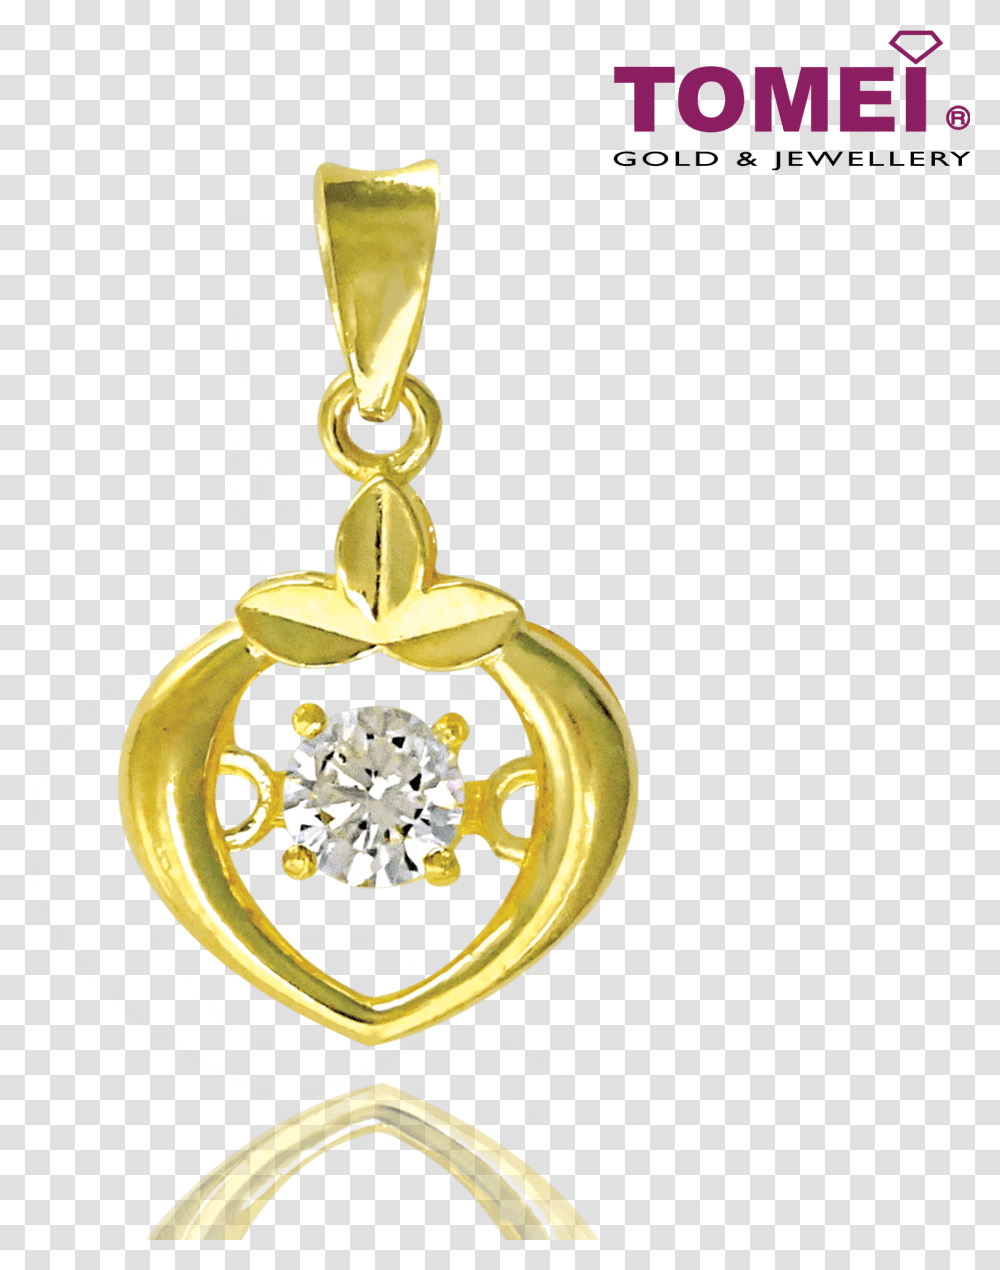 Whisper Tomei Jewellery, Pendant, Locket, Jewelry, Accessories Transparent Png